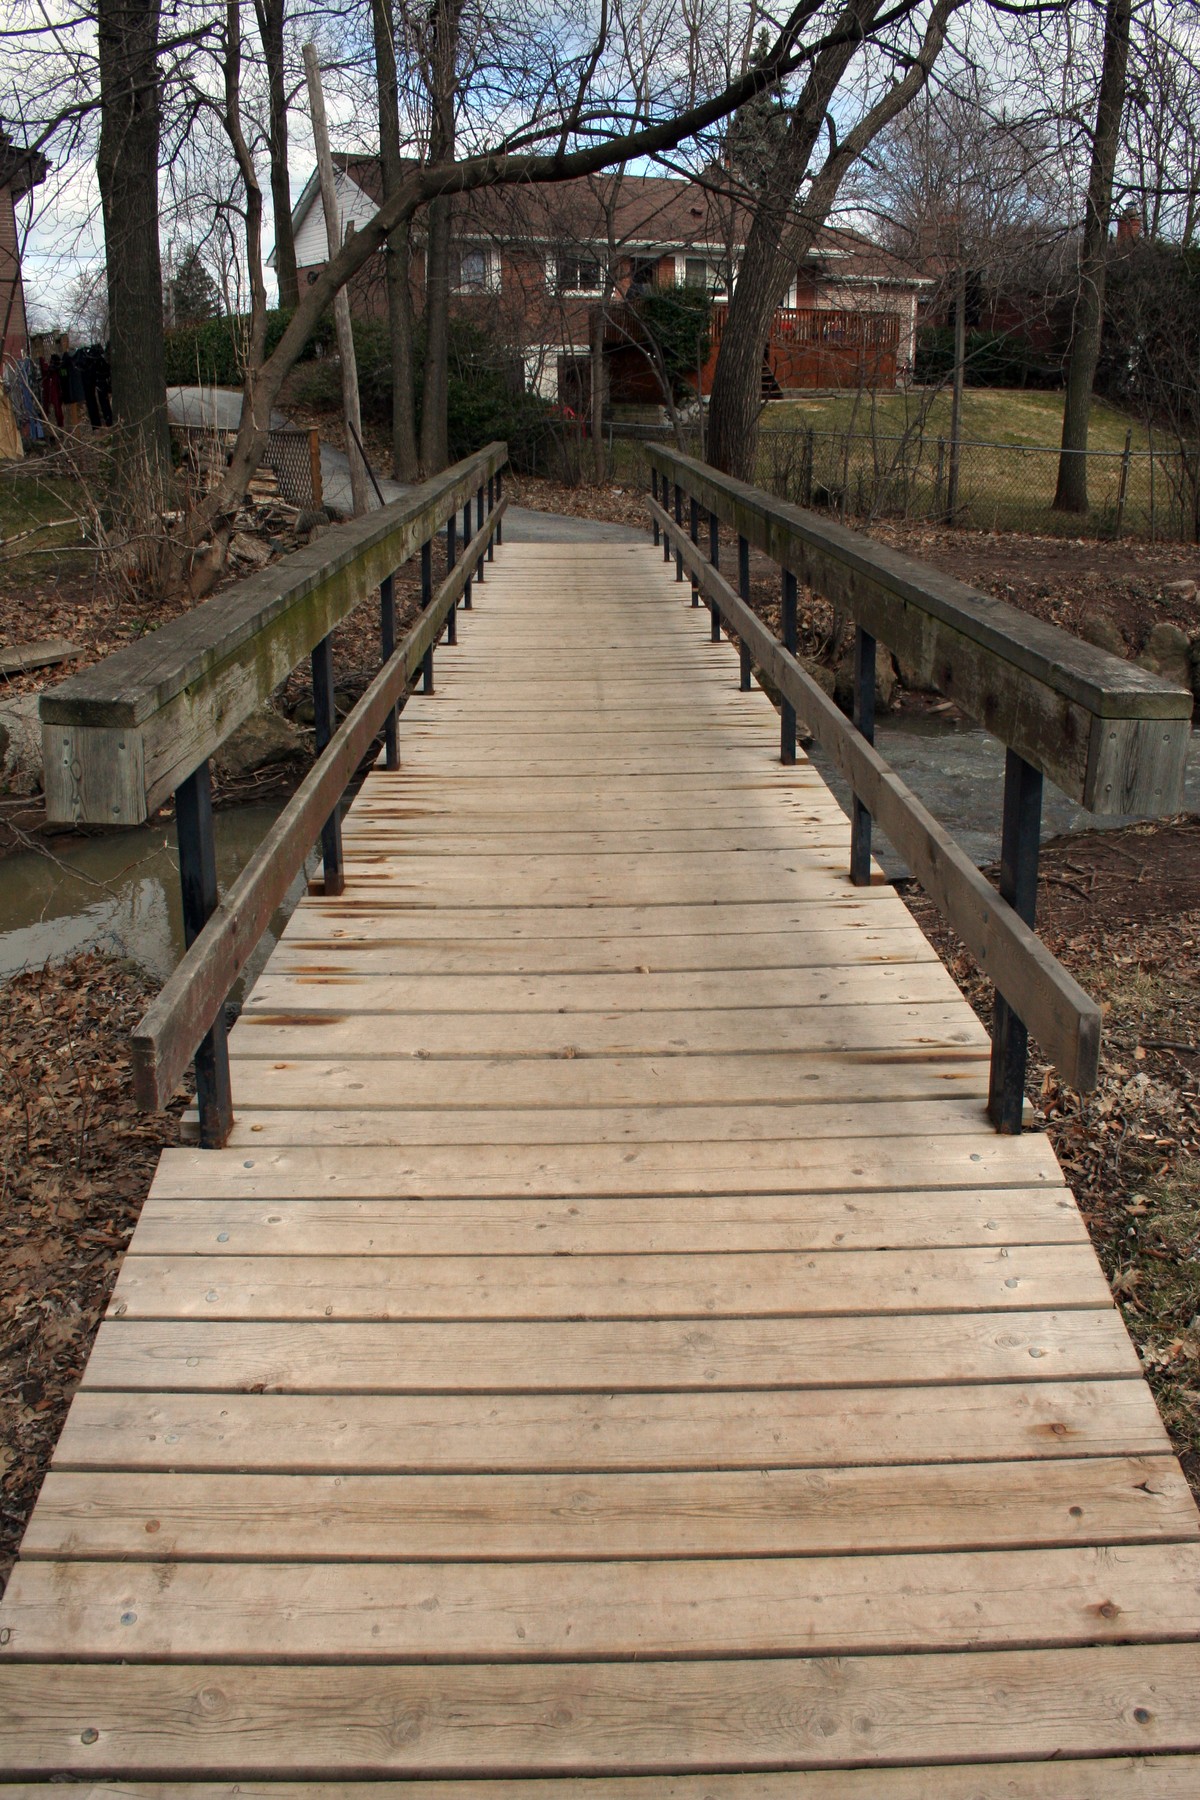 Wooden Walkway to trail | pquan  -  Foter  -  CC BY-SA 2.0